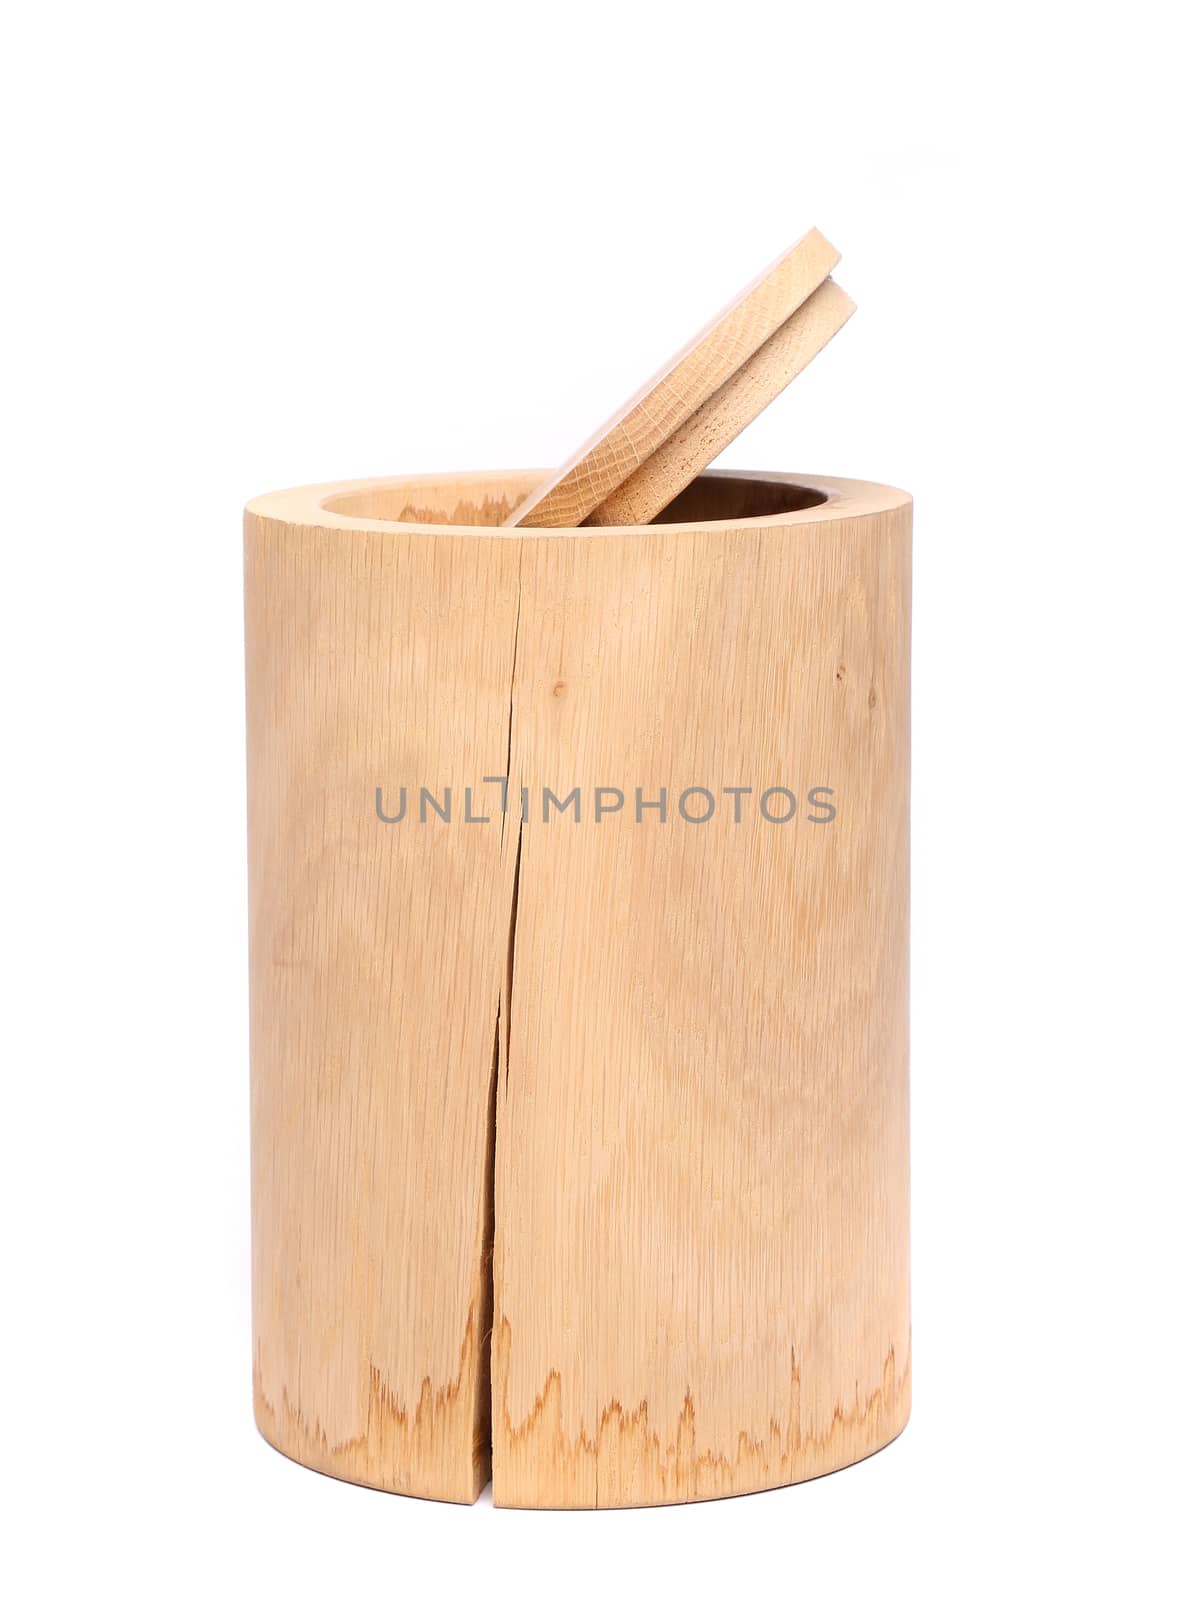 Birch bark container with open top by indigolotos